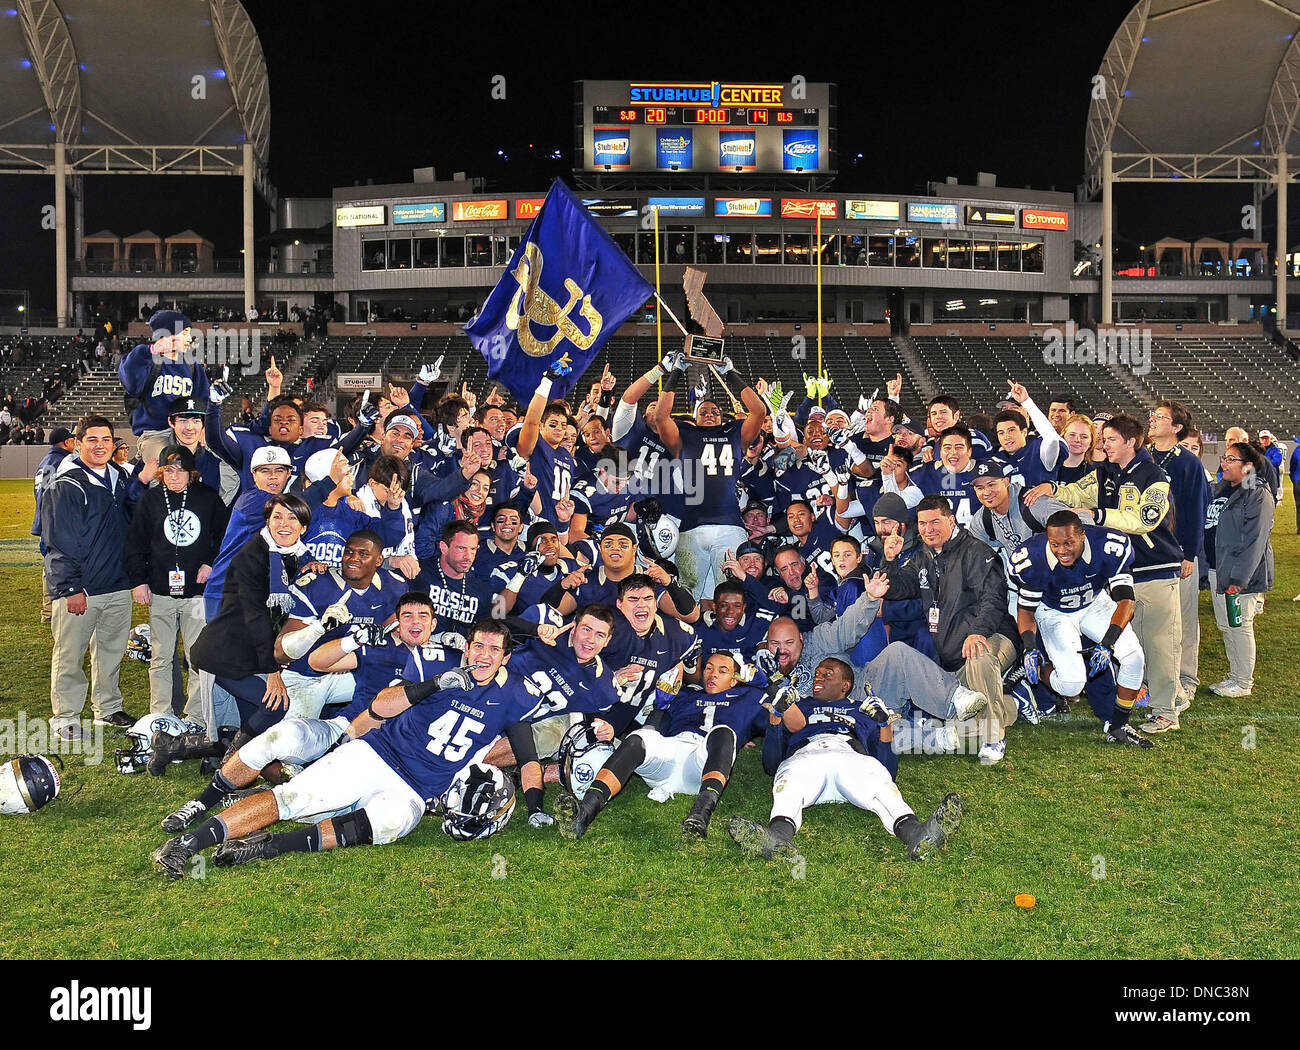 Carson, CA, . 21st Dec, 2013. Saint John Bosco Braves head coach Jason Negron and his players pose for a photo after winning the CIF Open Division California State Football Championship football game between the Concord De La Salle Spartans and the Saint John Bosco Braves at the StubHub Center in Carson, California.The Saint John Bosco Braves defeat the Concord De La Salle Spartans 20-14.Louis Lopez/CSM/Alamy Live News Stock Photo